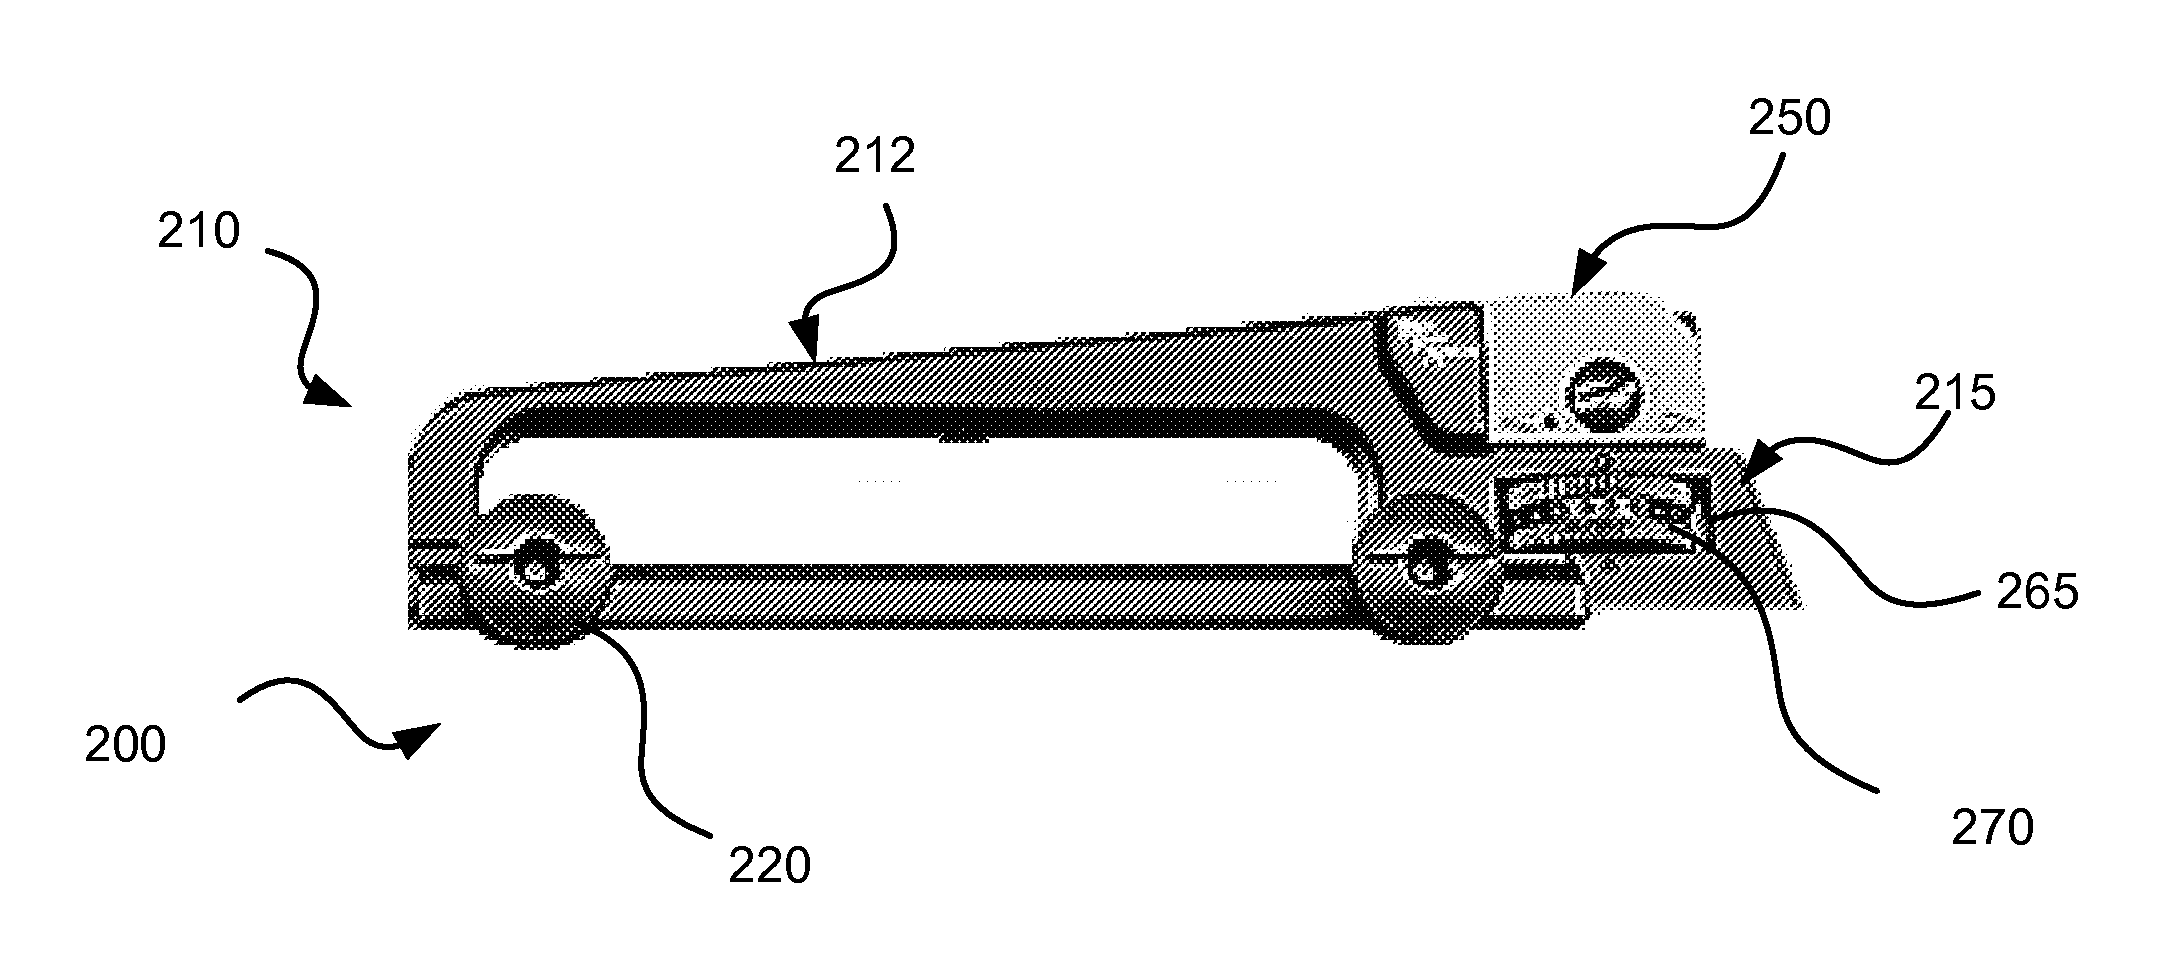 Detachable Carrying Handle For Firearm WIth Increased Range